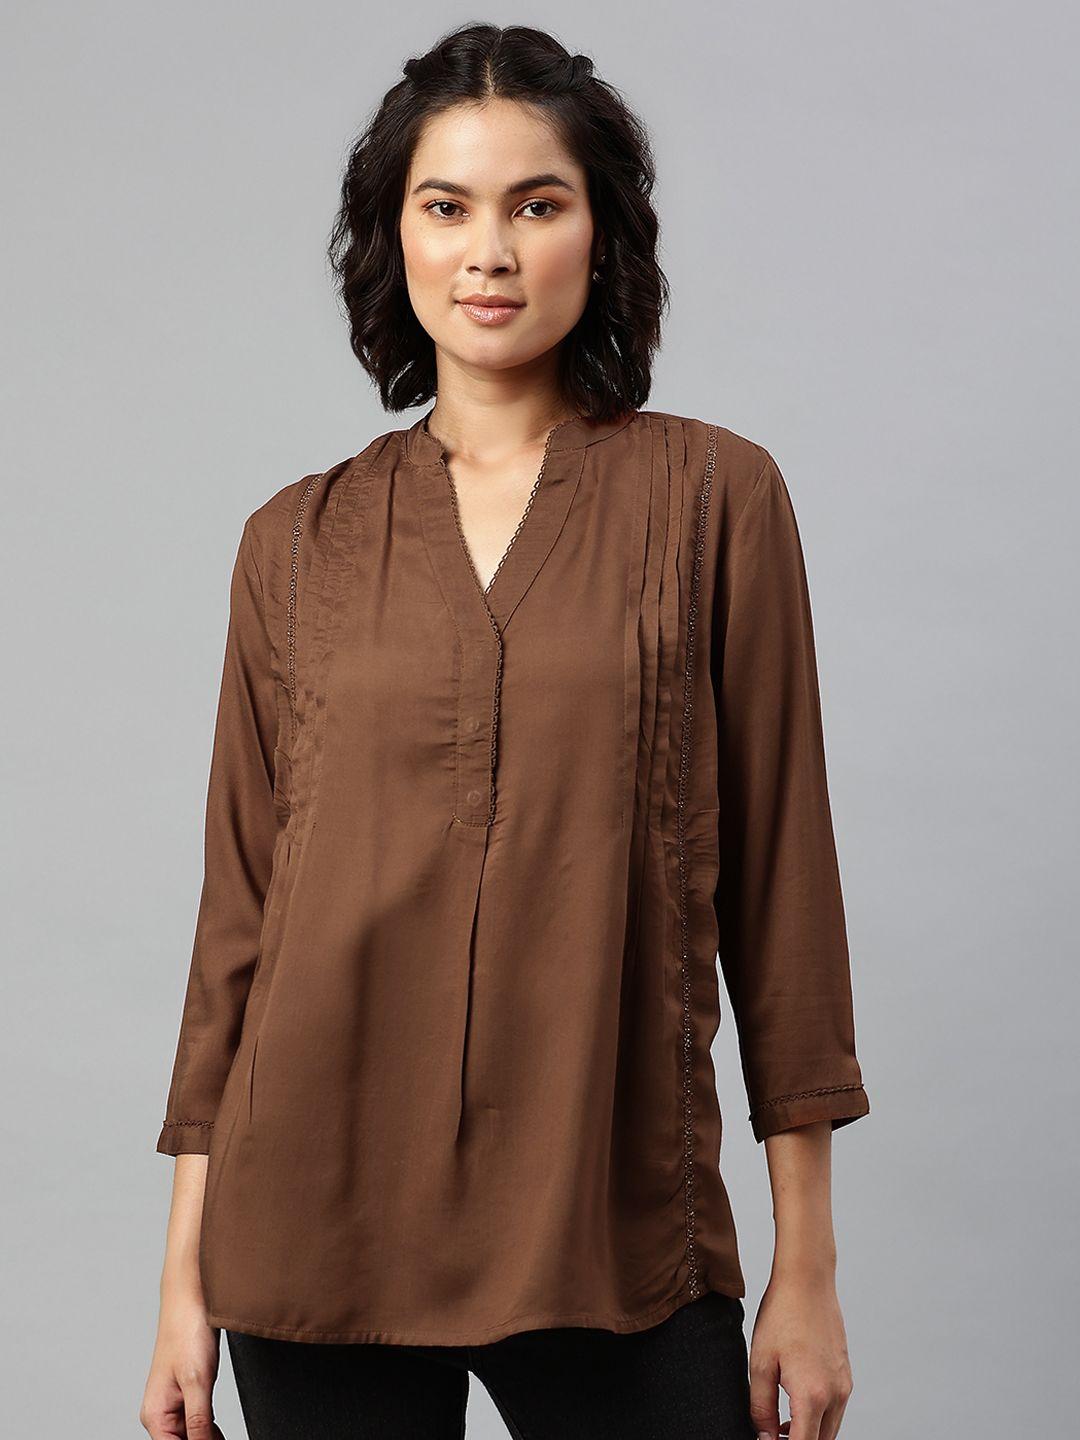 marks & spencer brown solid shirt style top